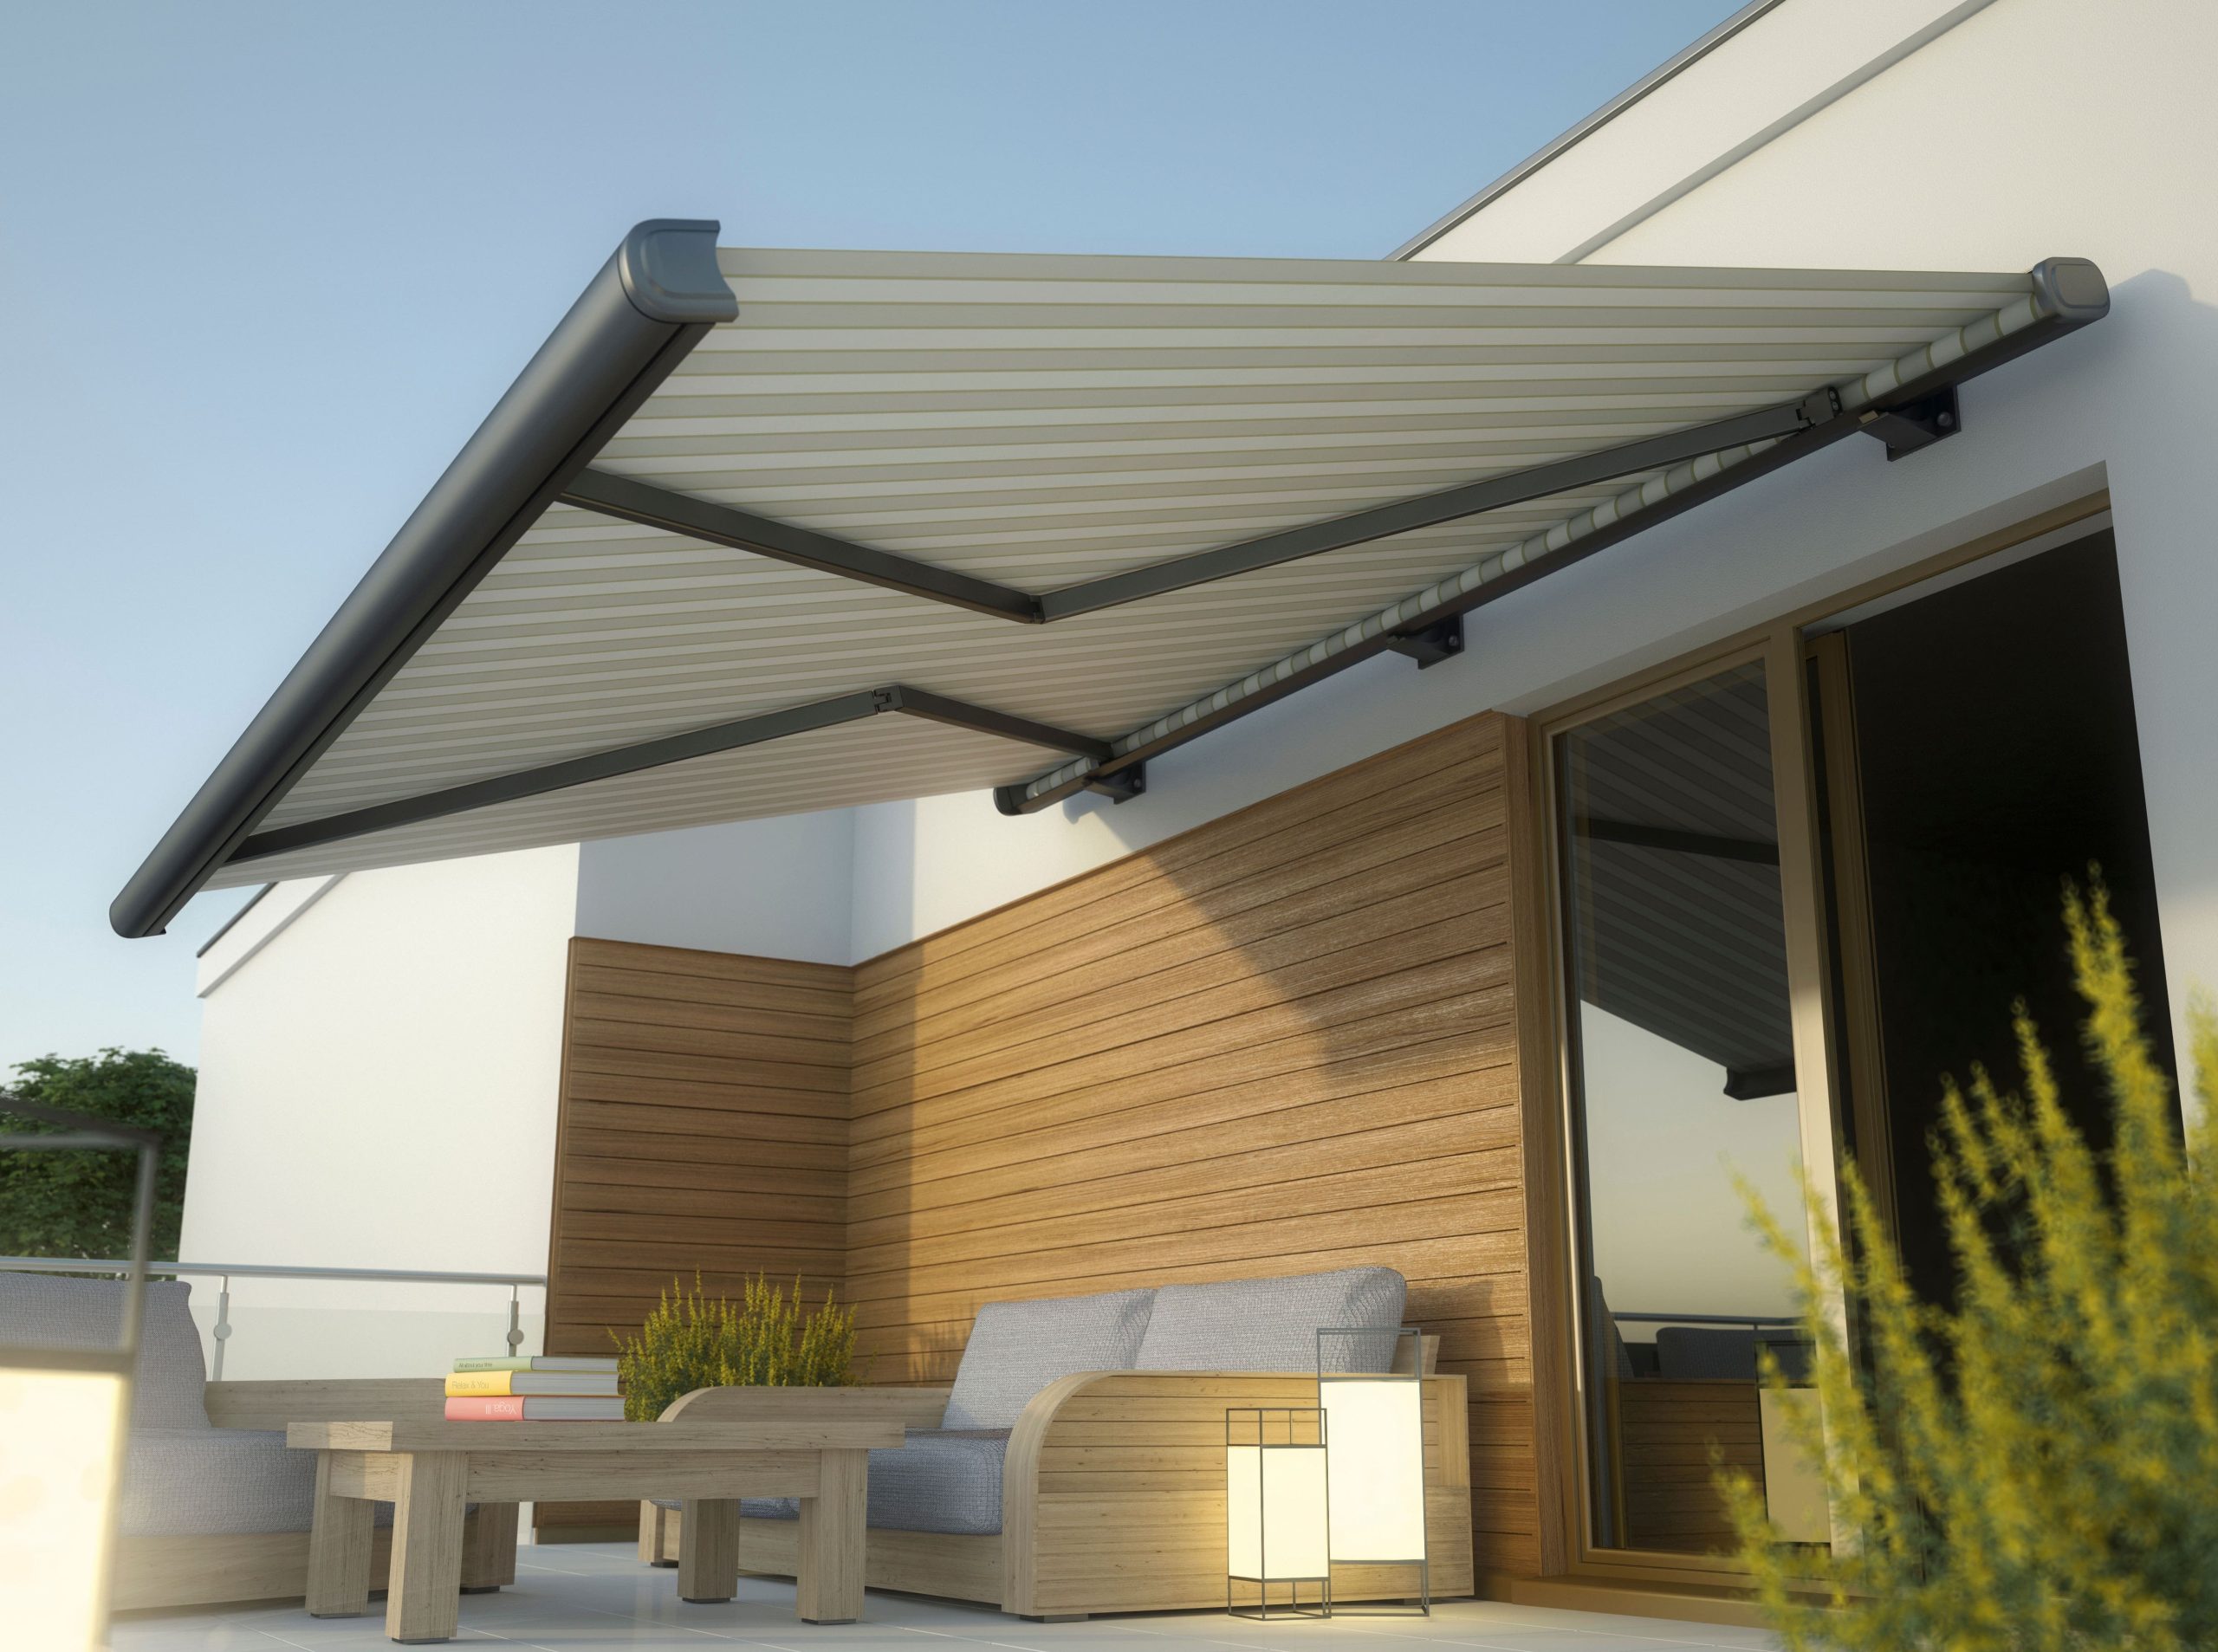 Convenient retracable awning for outdoor space in San Diego, CA.